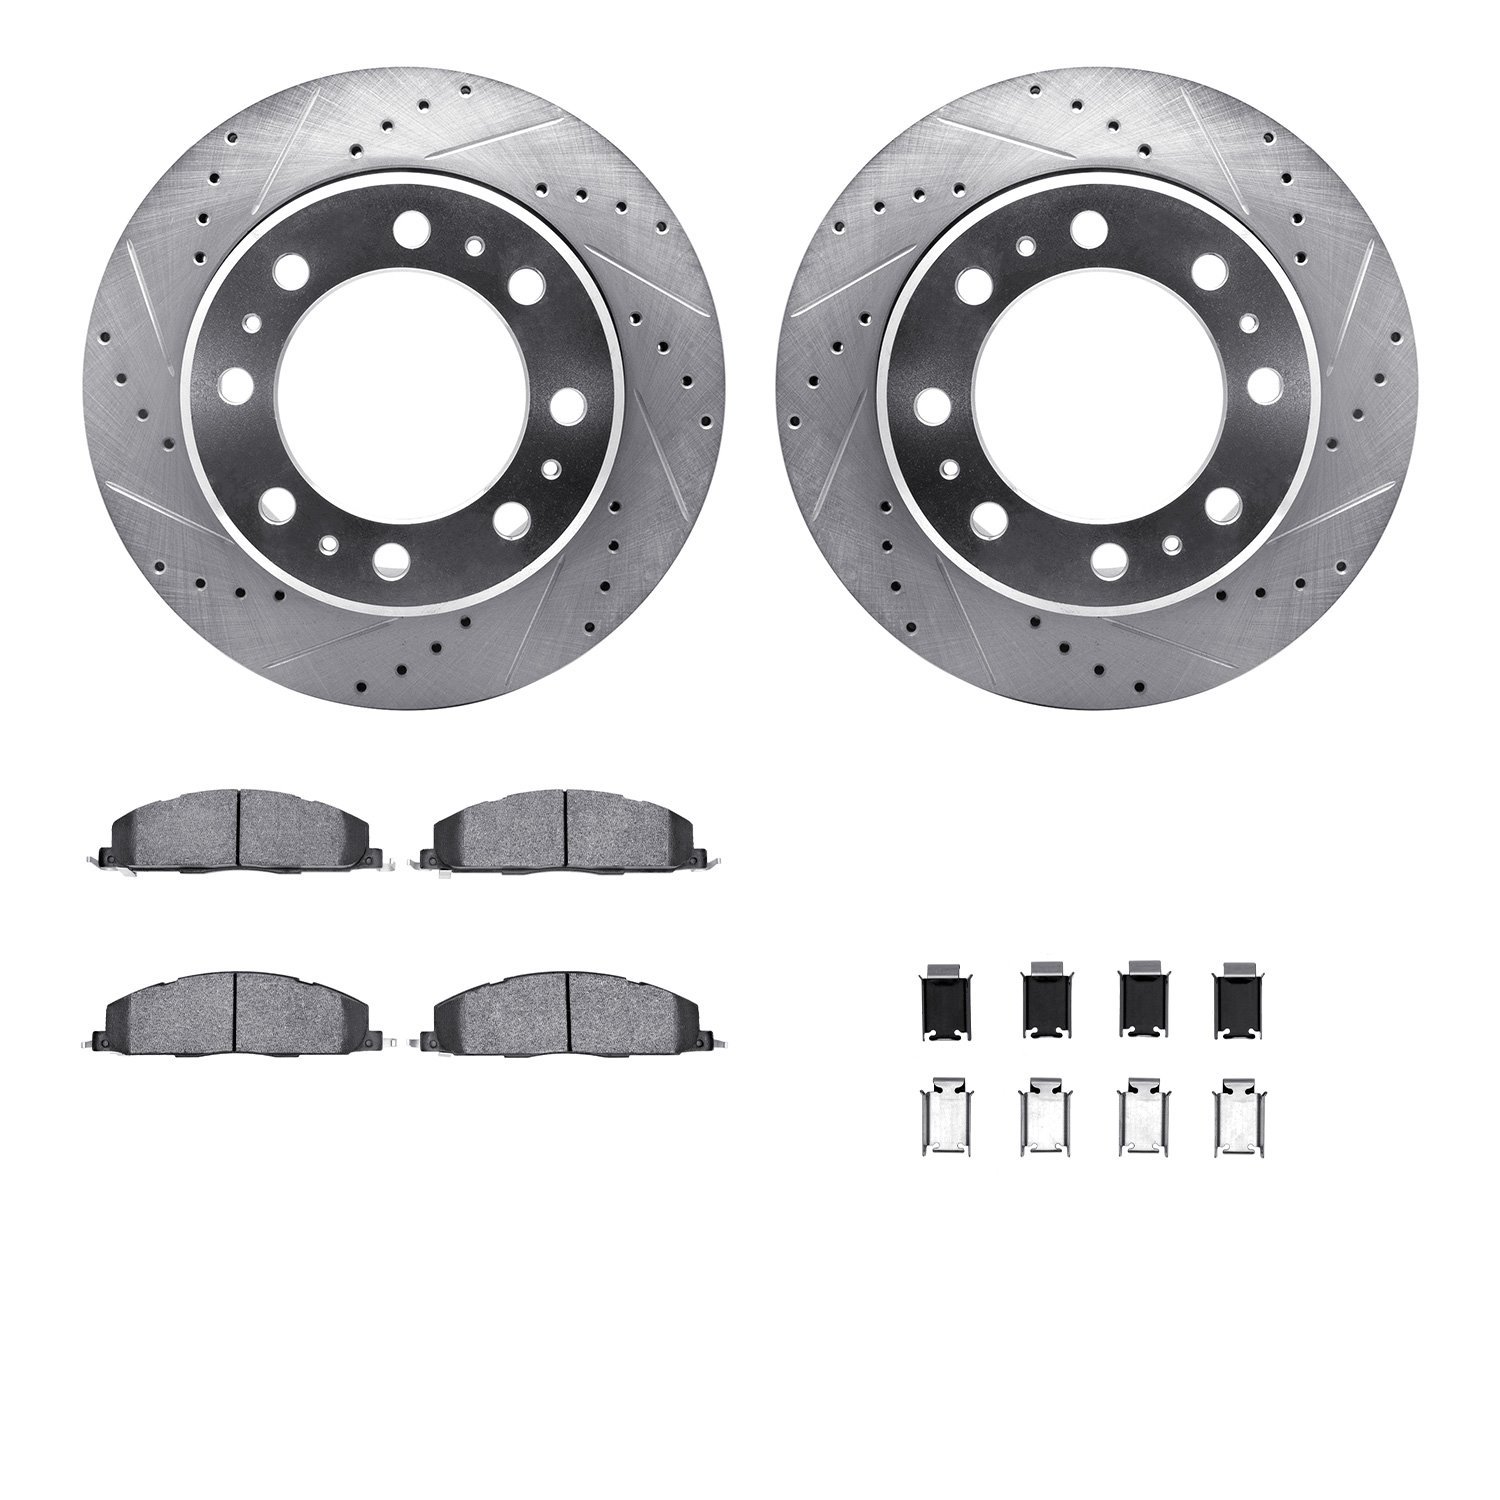 7412-40024 Drilled/Slotted Brake Rotors with Ultimate-Duty Brake Pads Kit & Hardware [Silver], 2009-2018 Mopar, Position: Rear